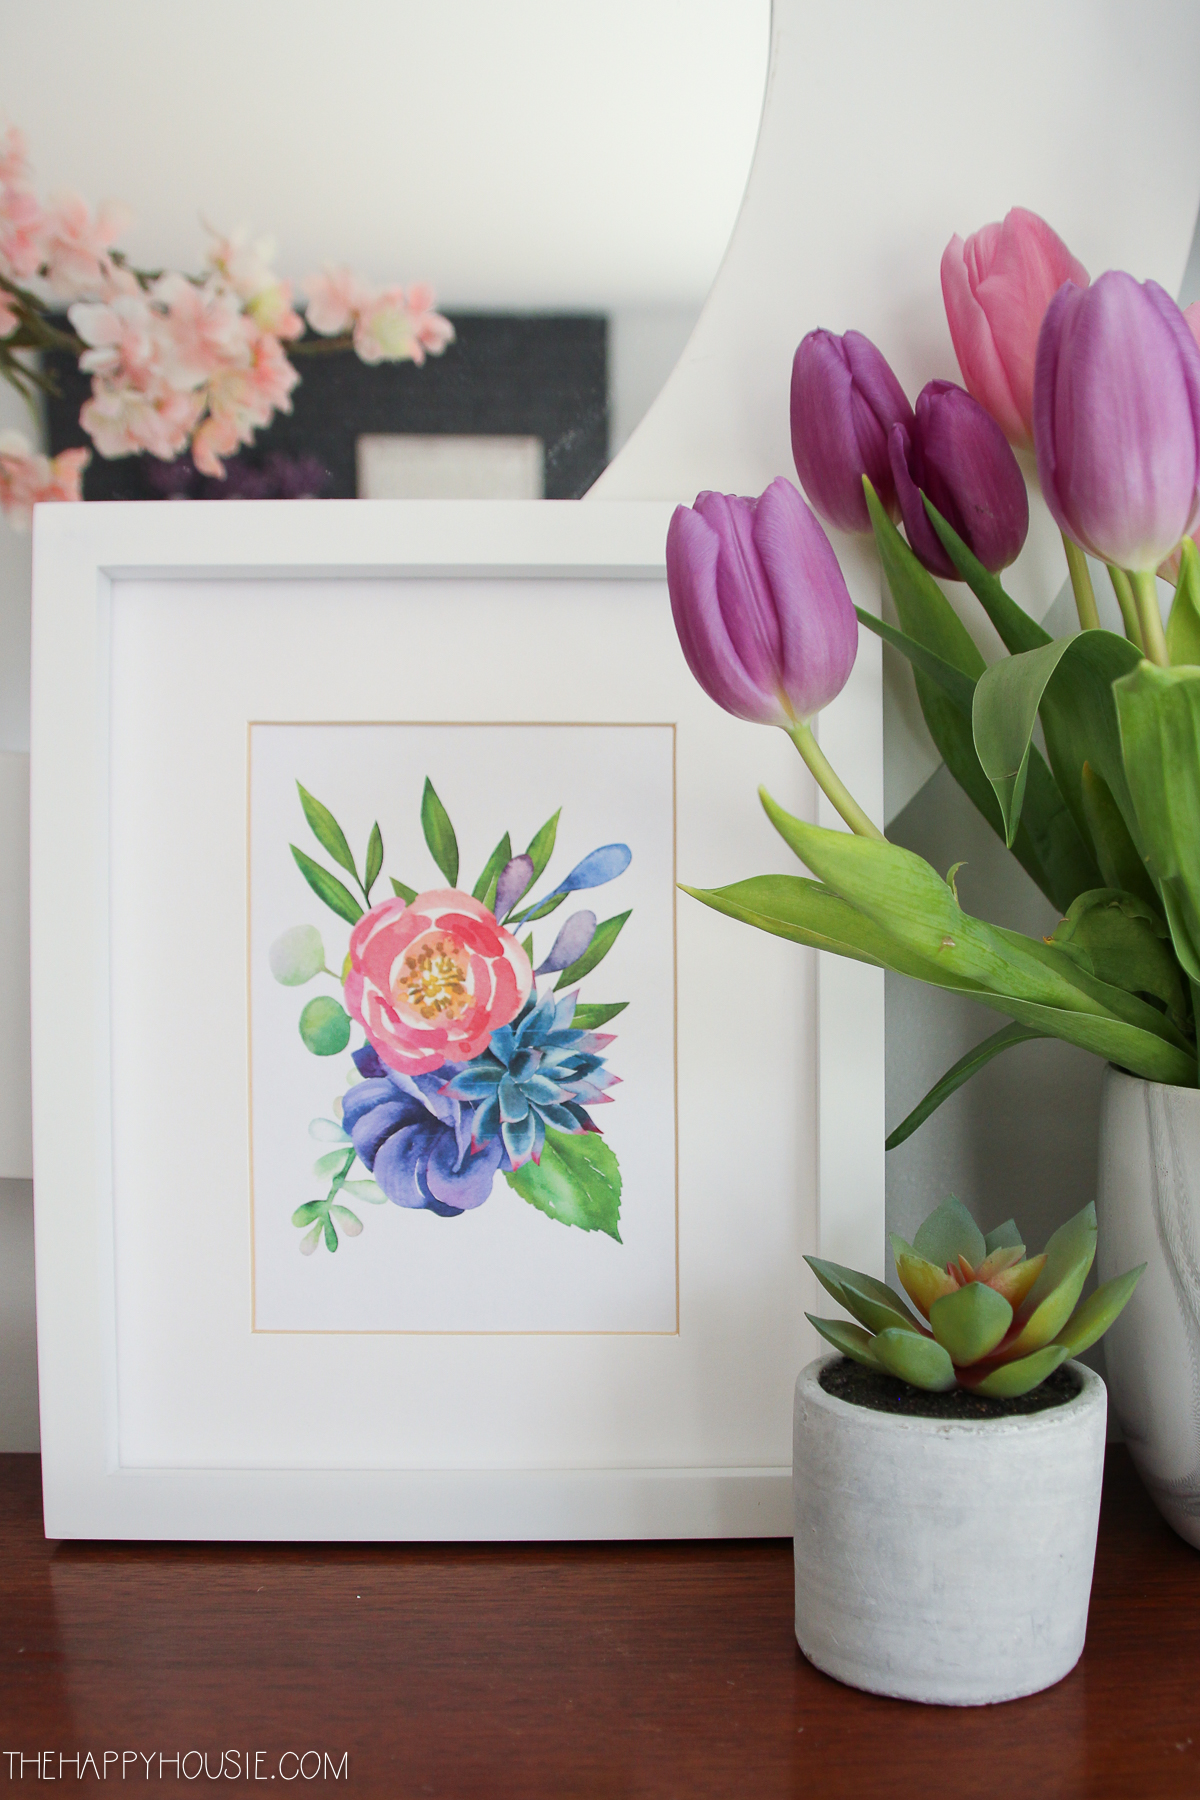 A framed flower print is on the table.